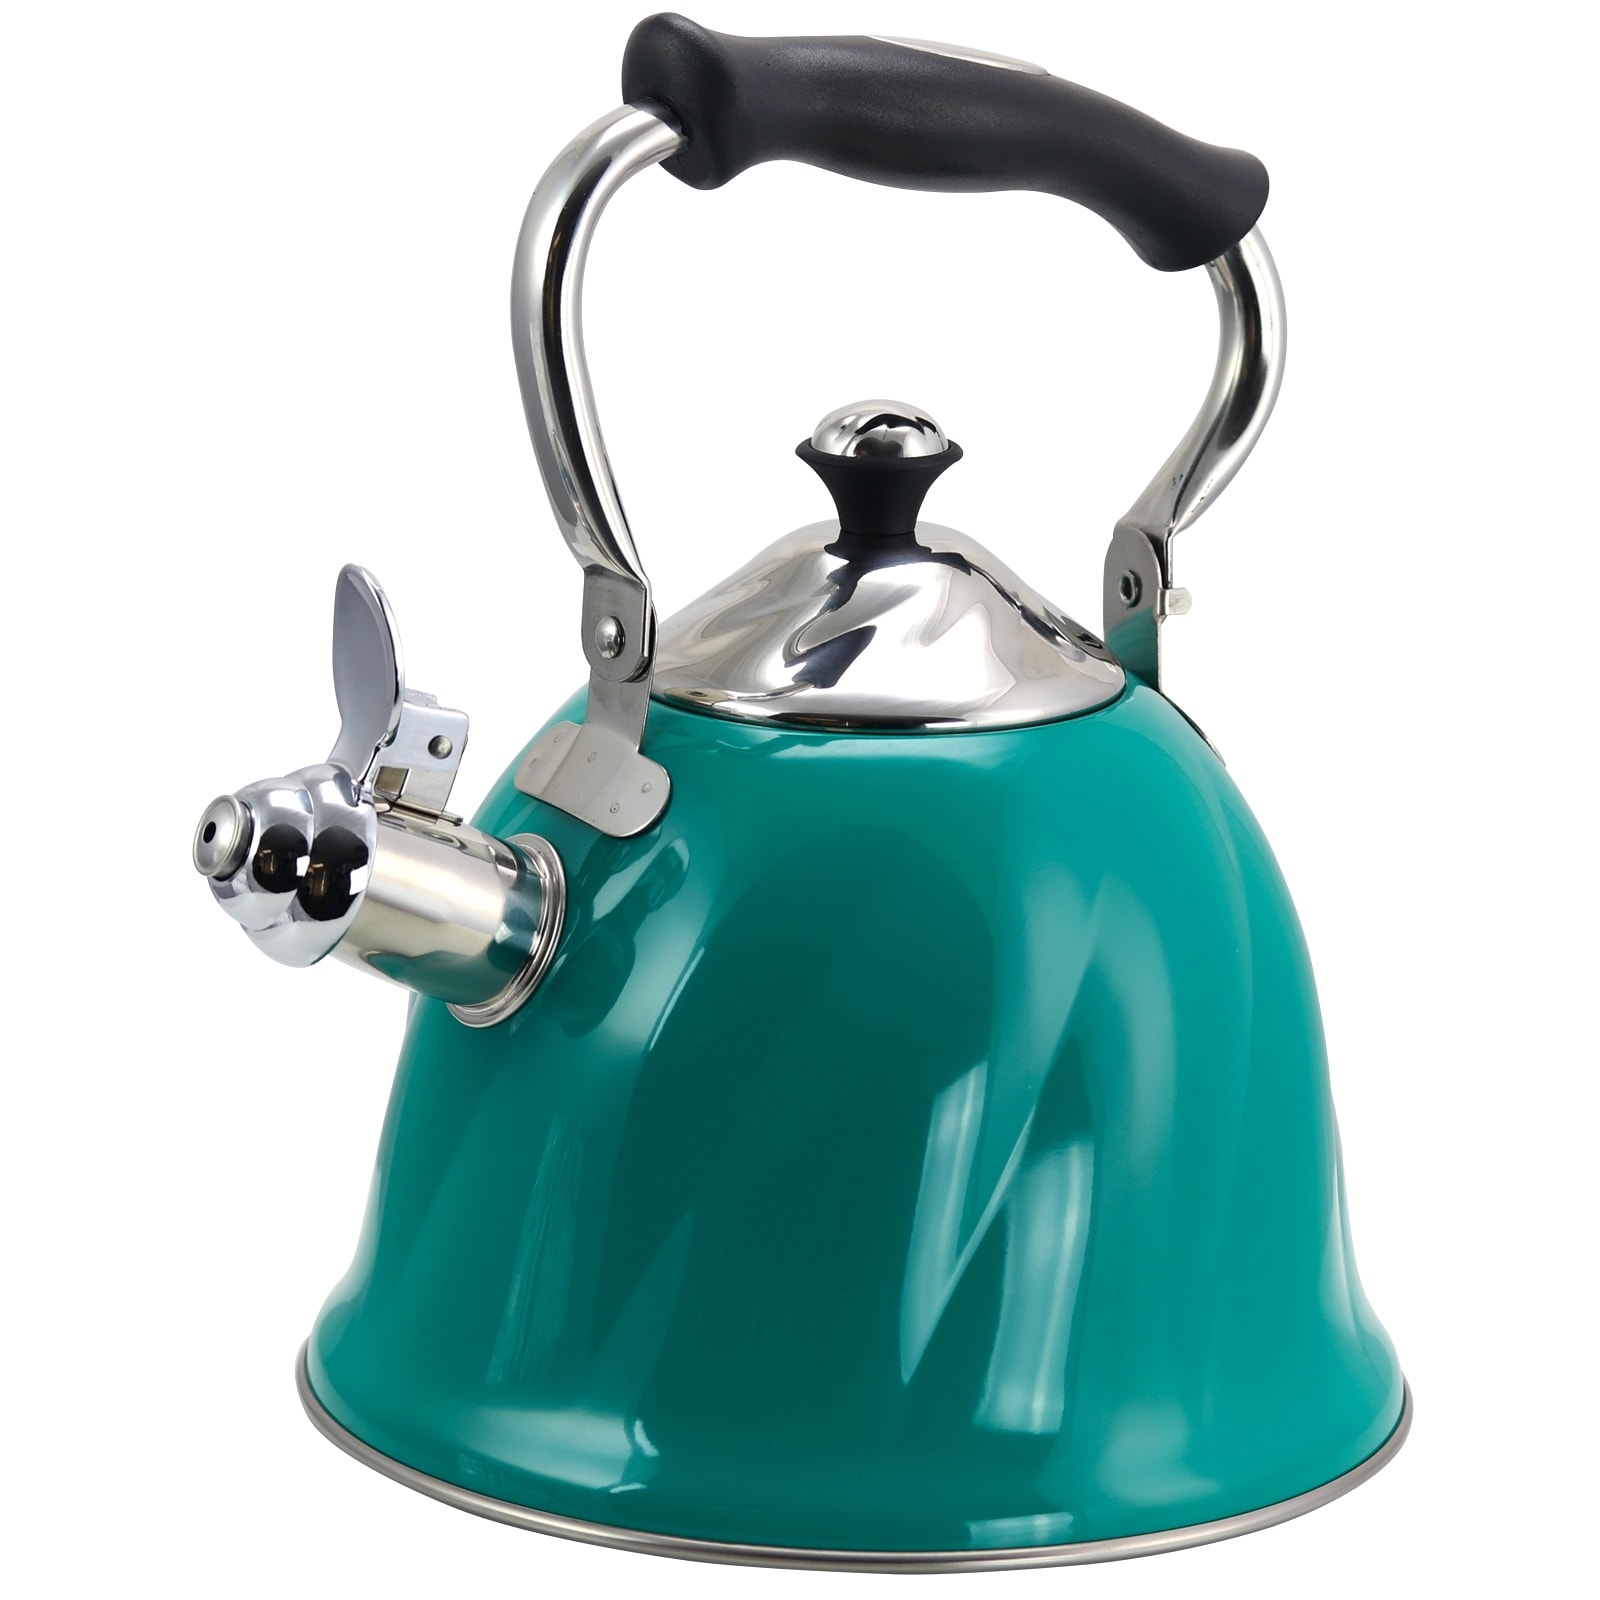 https://ak1.ostkcdn.com/images/products/is/images/direct/dff13ff98ccf28a862c5c1ab284ce9be483d257a/Alberton-2.3-Qt.-Tea-Kettle-with-Lid--Stanless-Steel-Emerald-Green.jpg